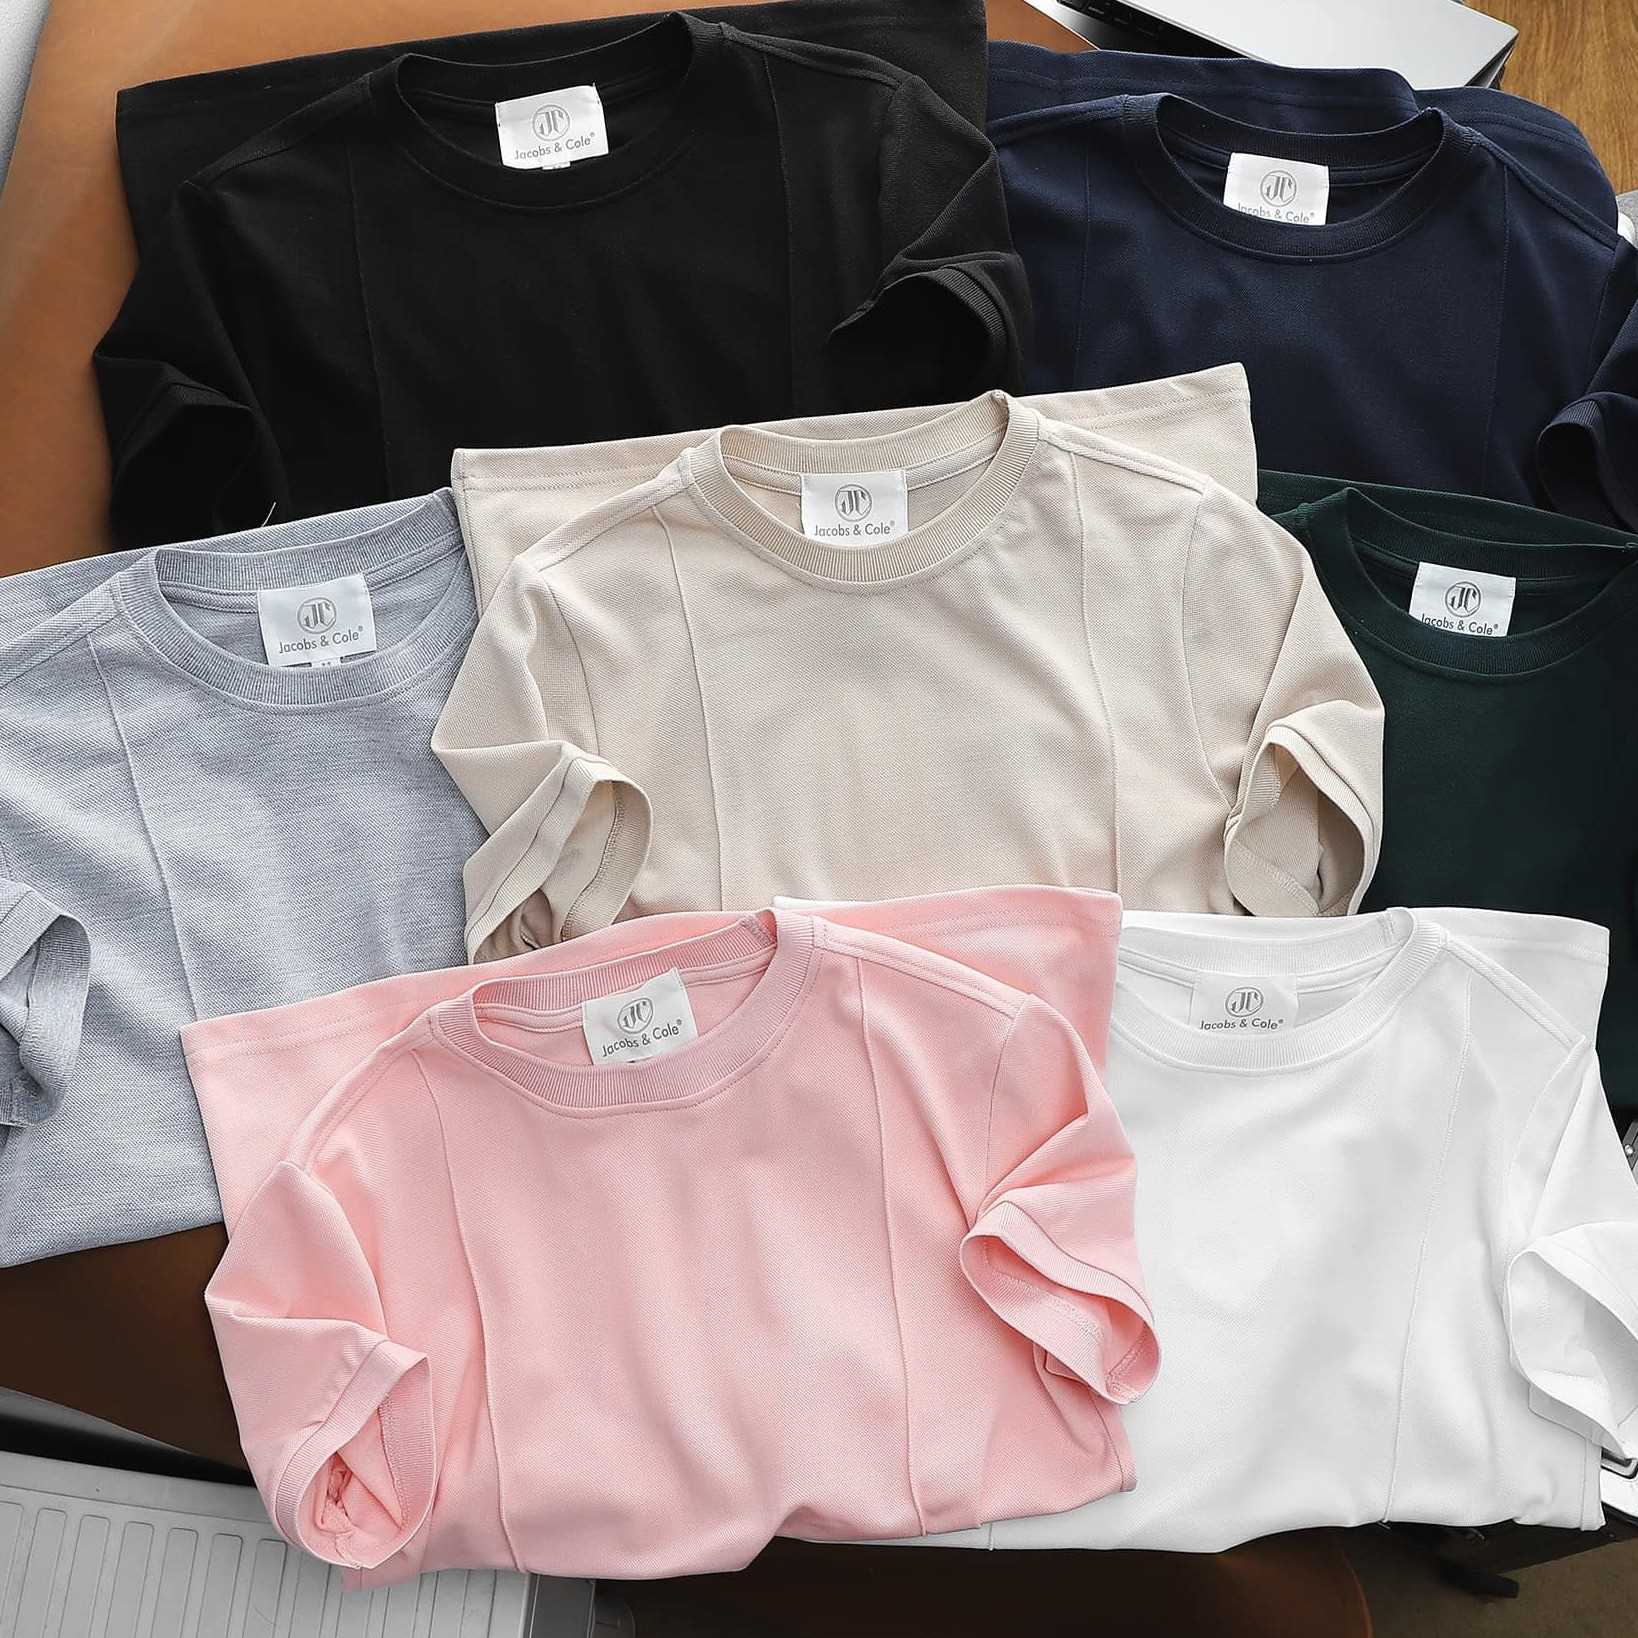 I am looking for plain Tshirt suppliers